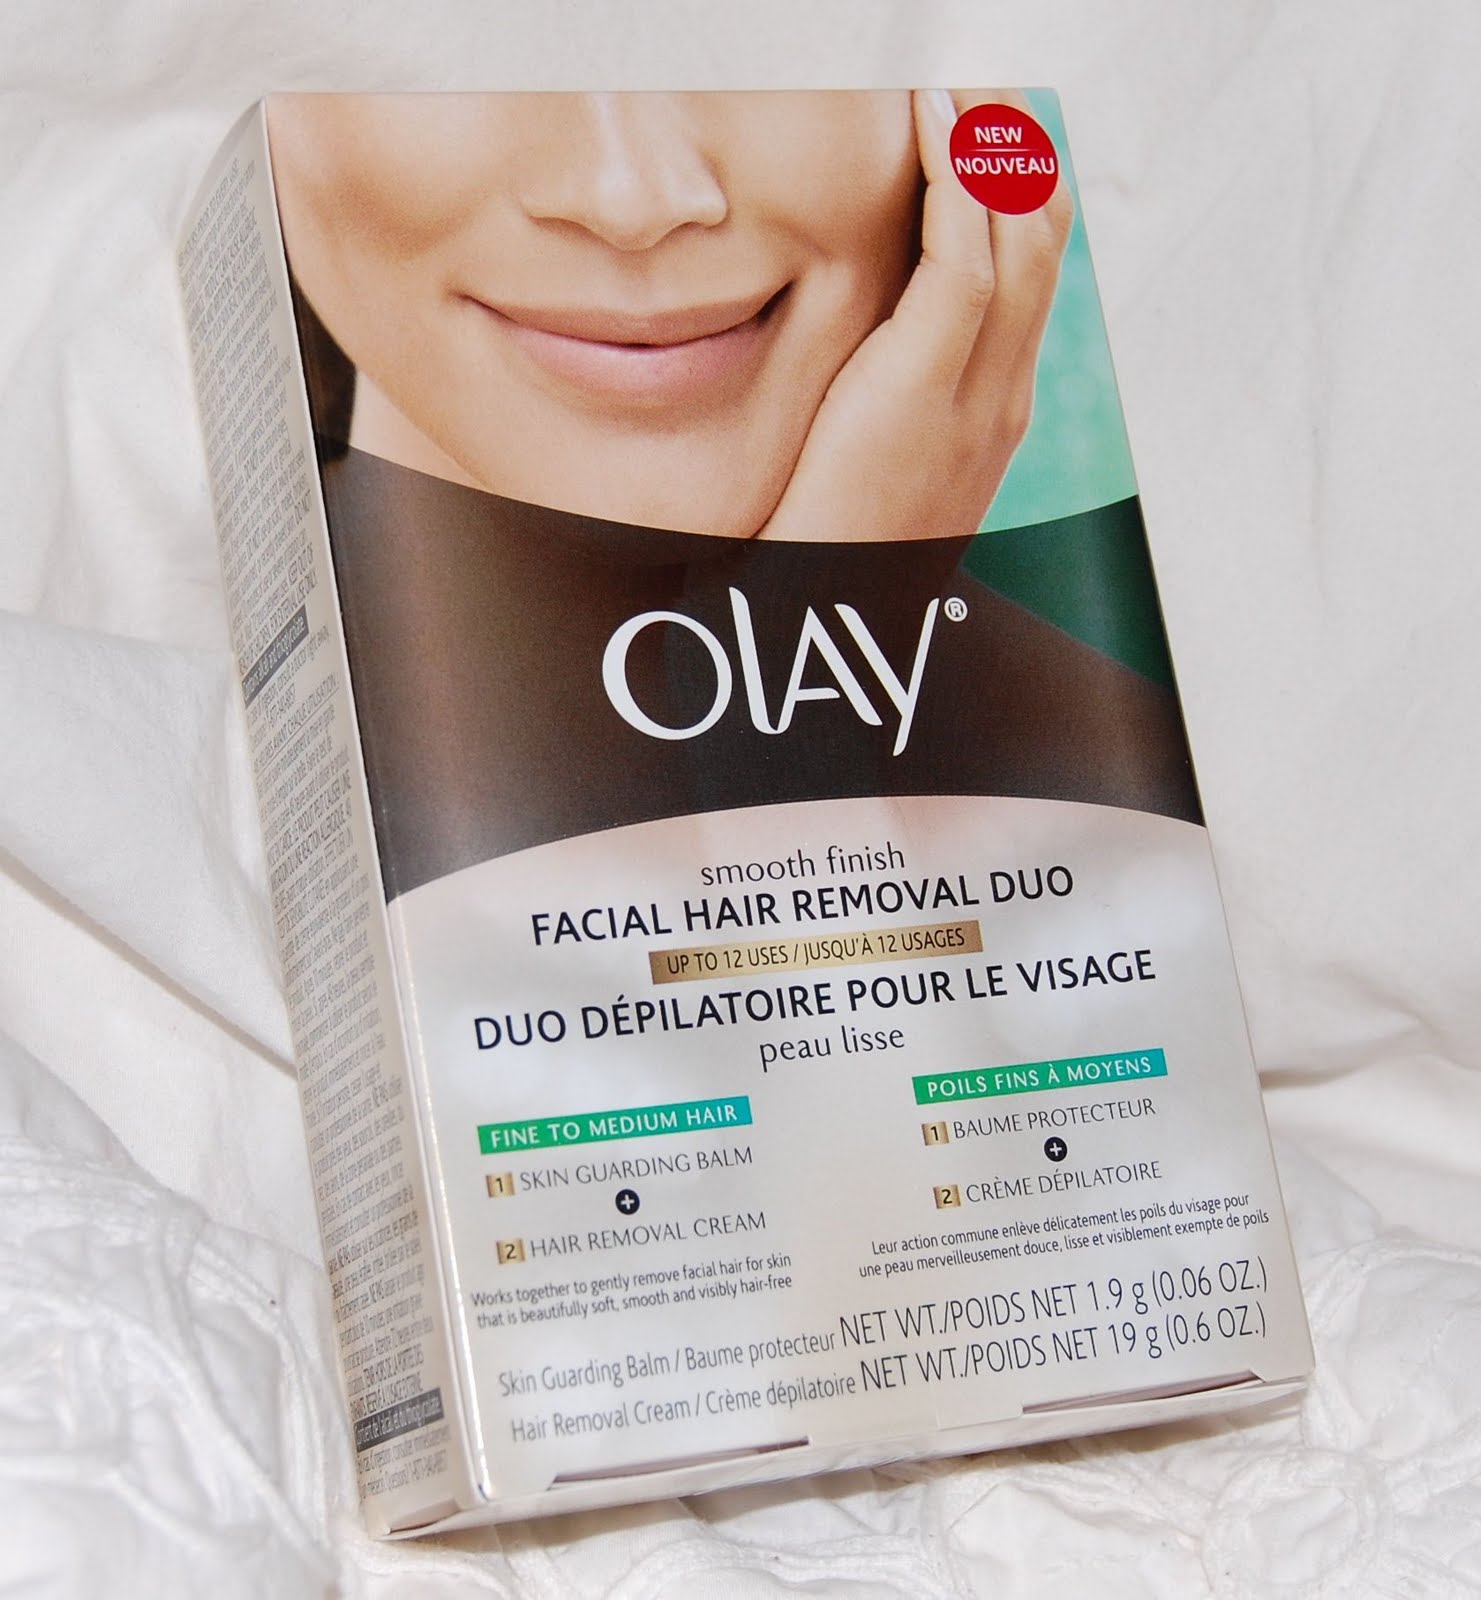 Beauty Squared Olay Smooth Finish Facial Hair Removal Duo Review